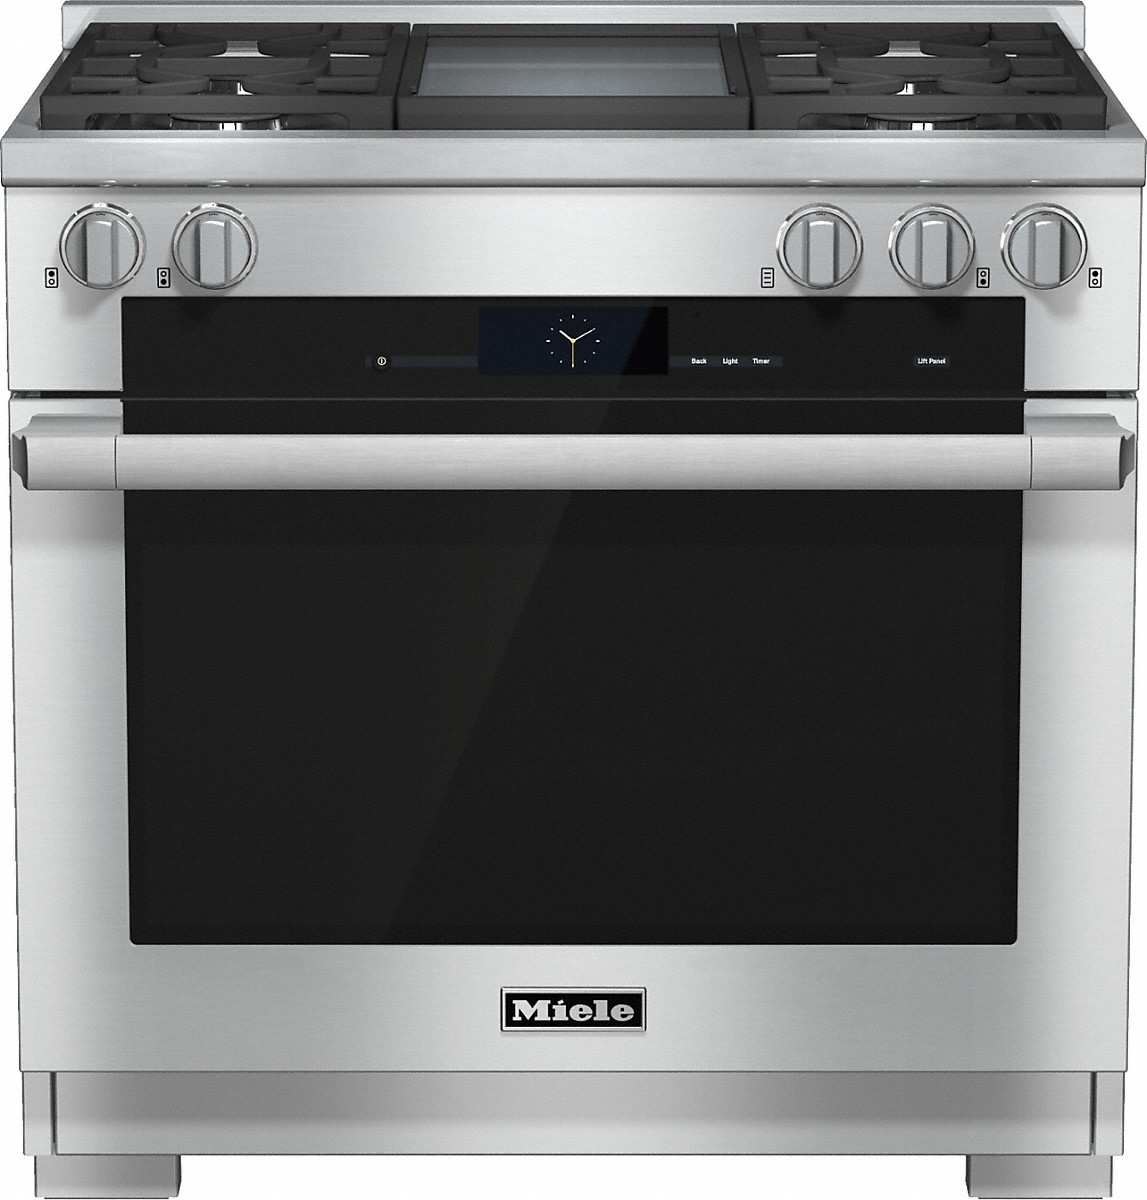 Miele - 5.8 cu. ft  Dual Fuel Range in Stainless - HR 1936-2 G